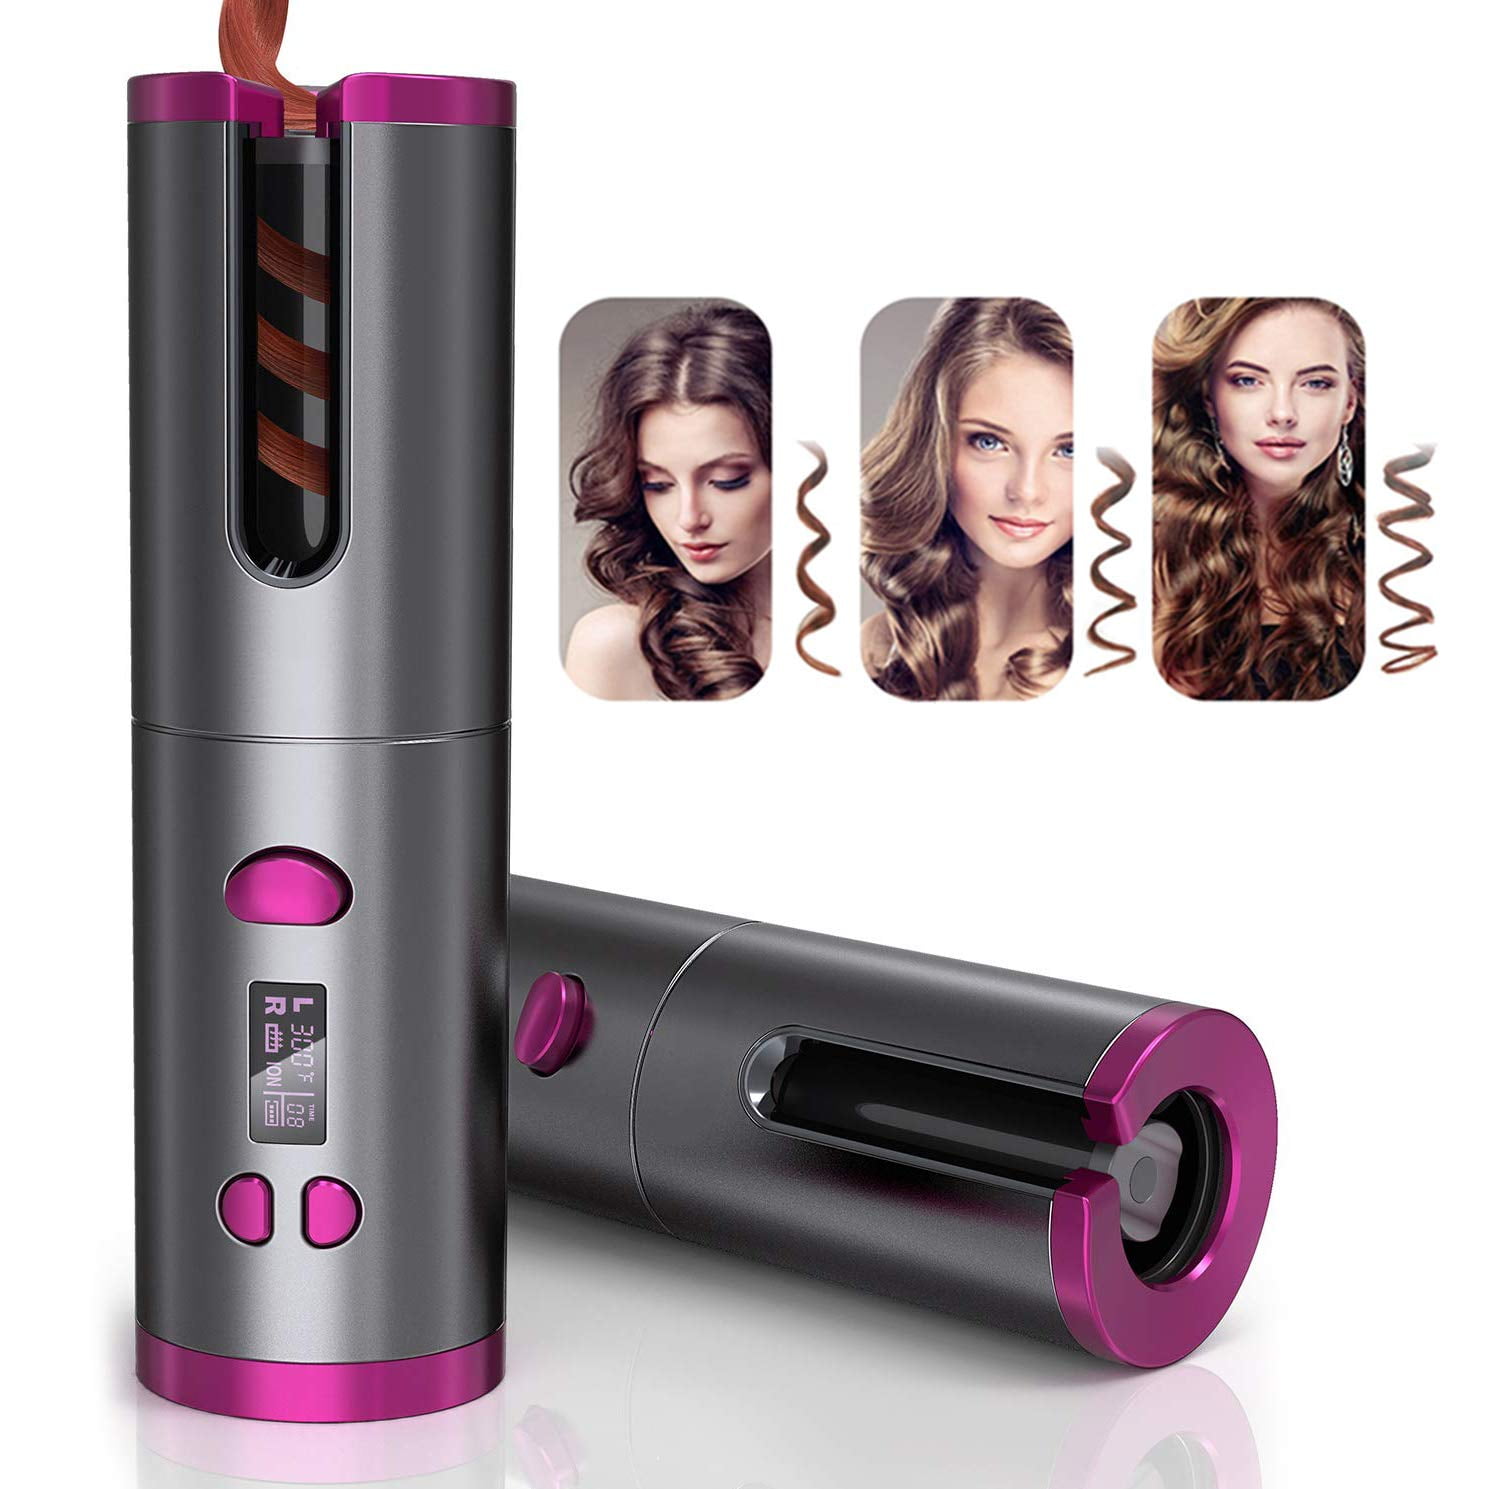 Buy Cordless Auto-Rotating Hair Curler Hair Waver Curling Iron with LCD  Temp Display, Rechargeable Portable,Temperature Adjustable Tourmaline  Ceramic Hair Roller for Travel Online at Lowest Price in Ubuy Italy.  740974449